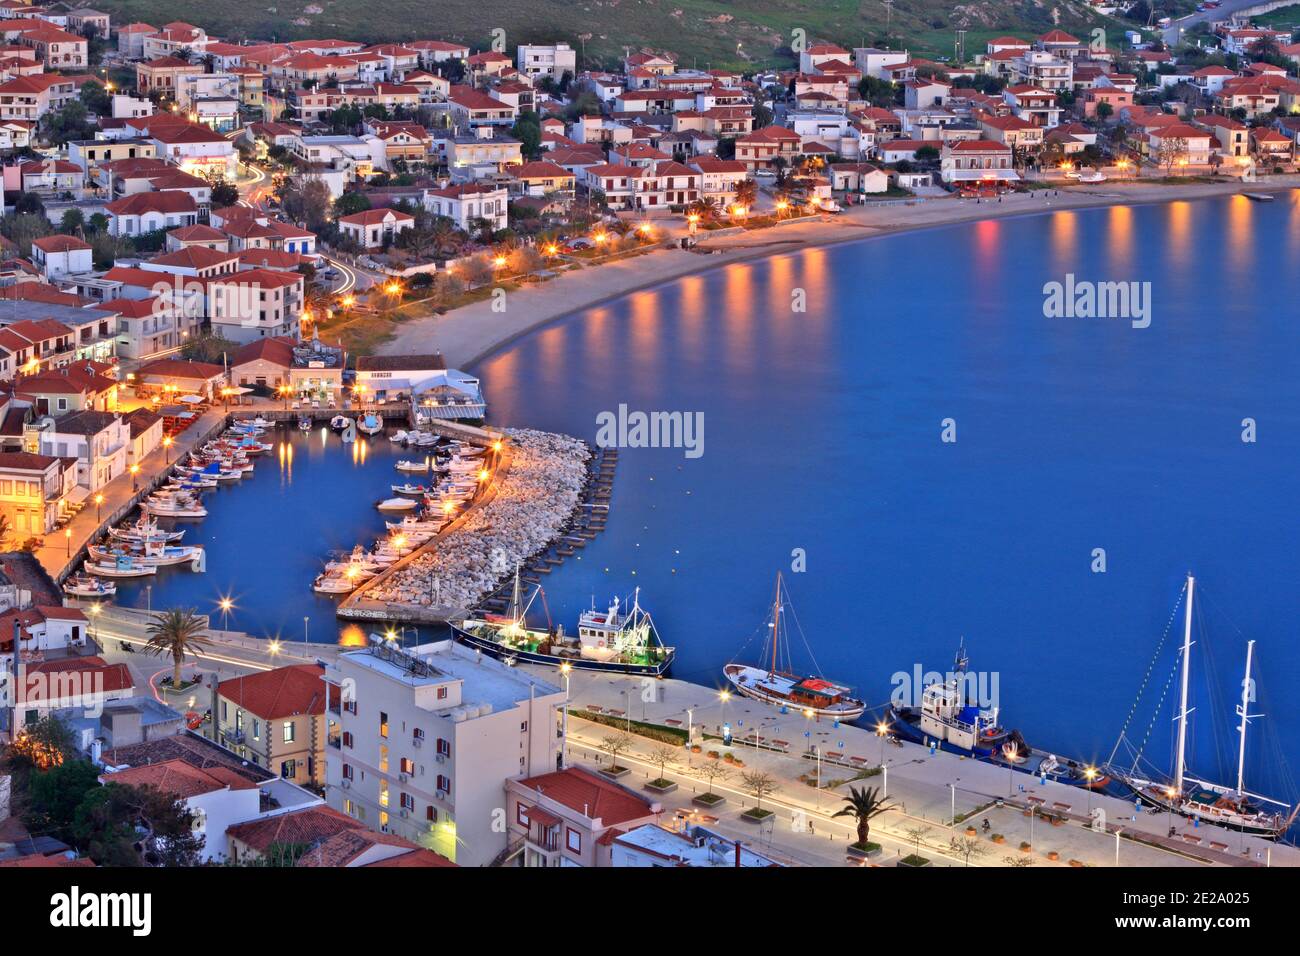 Myrina town, the capital town of Lemnos island, as seen during blue hour from the town's castle, in Lemnos, Greece, Europe Stock Photo